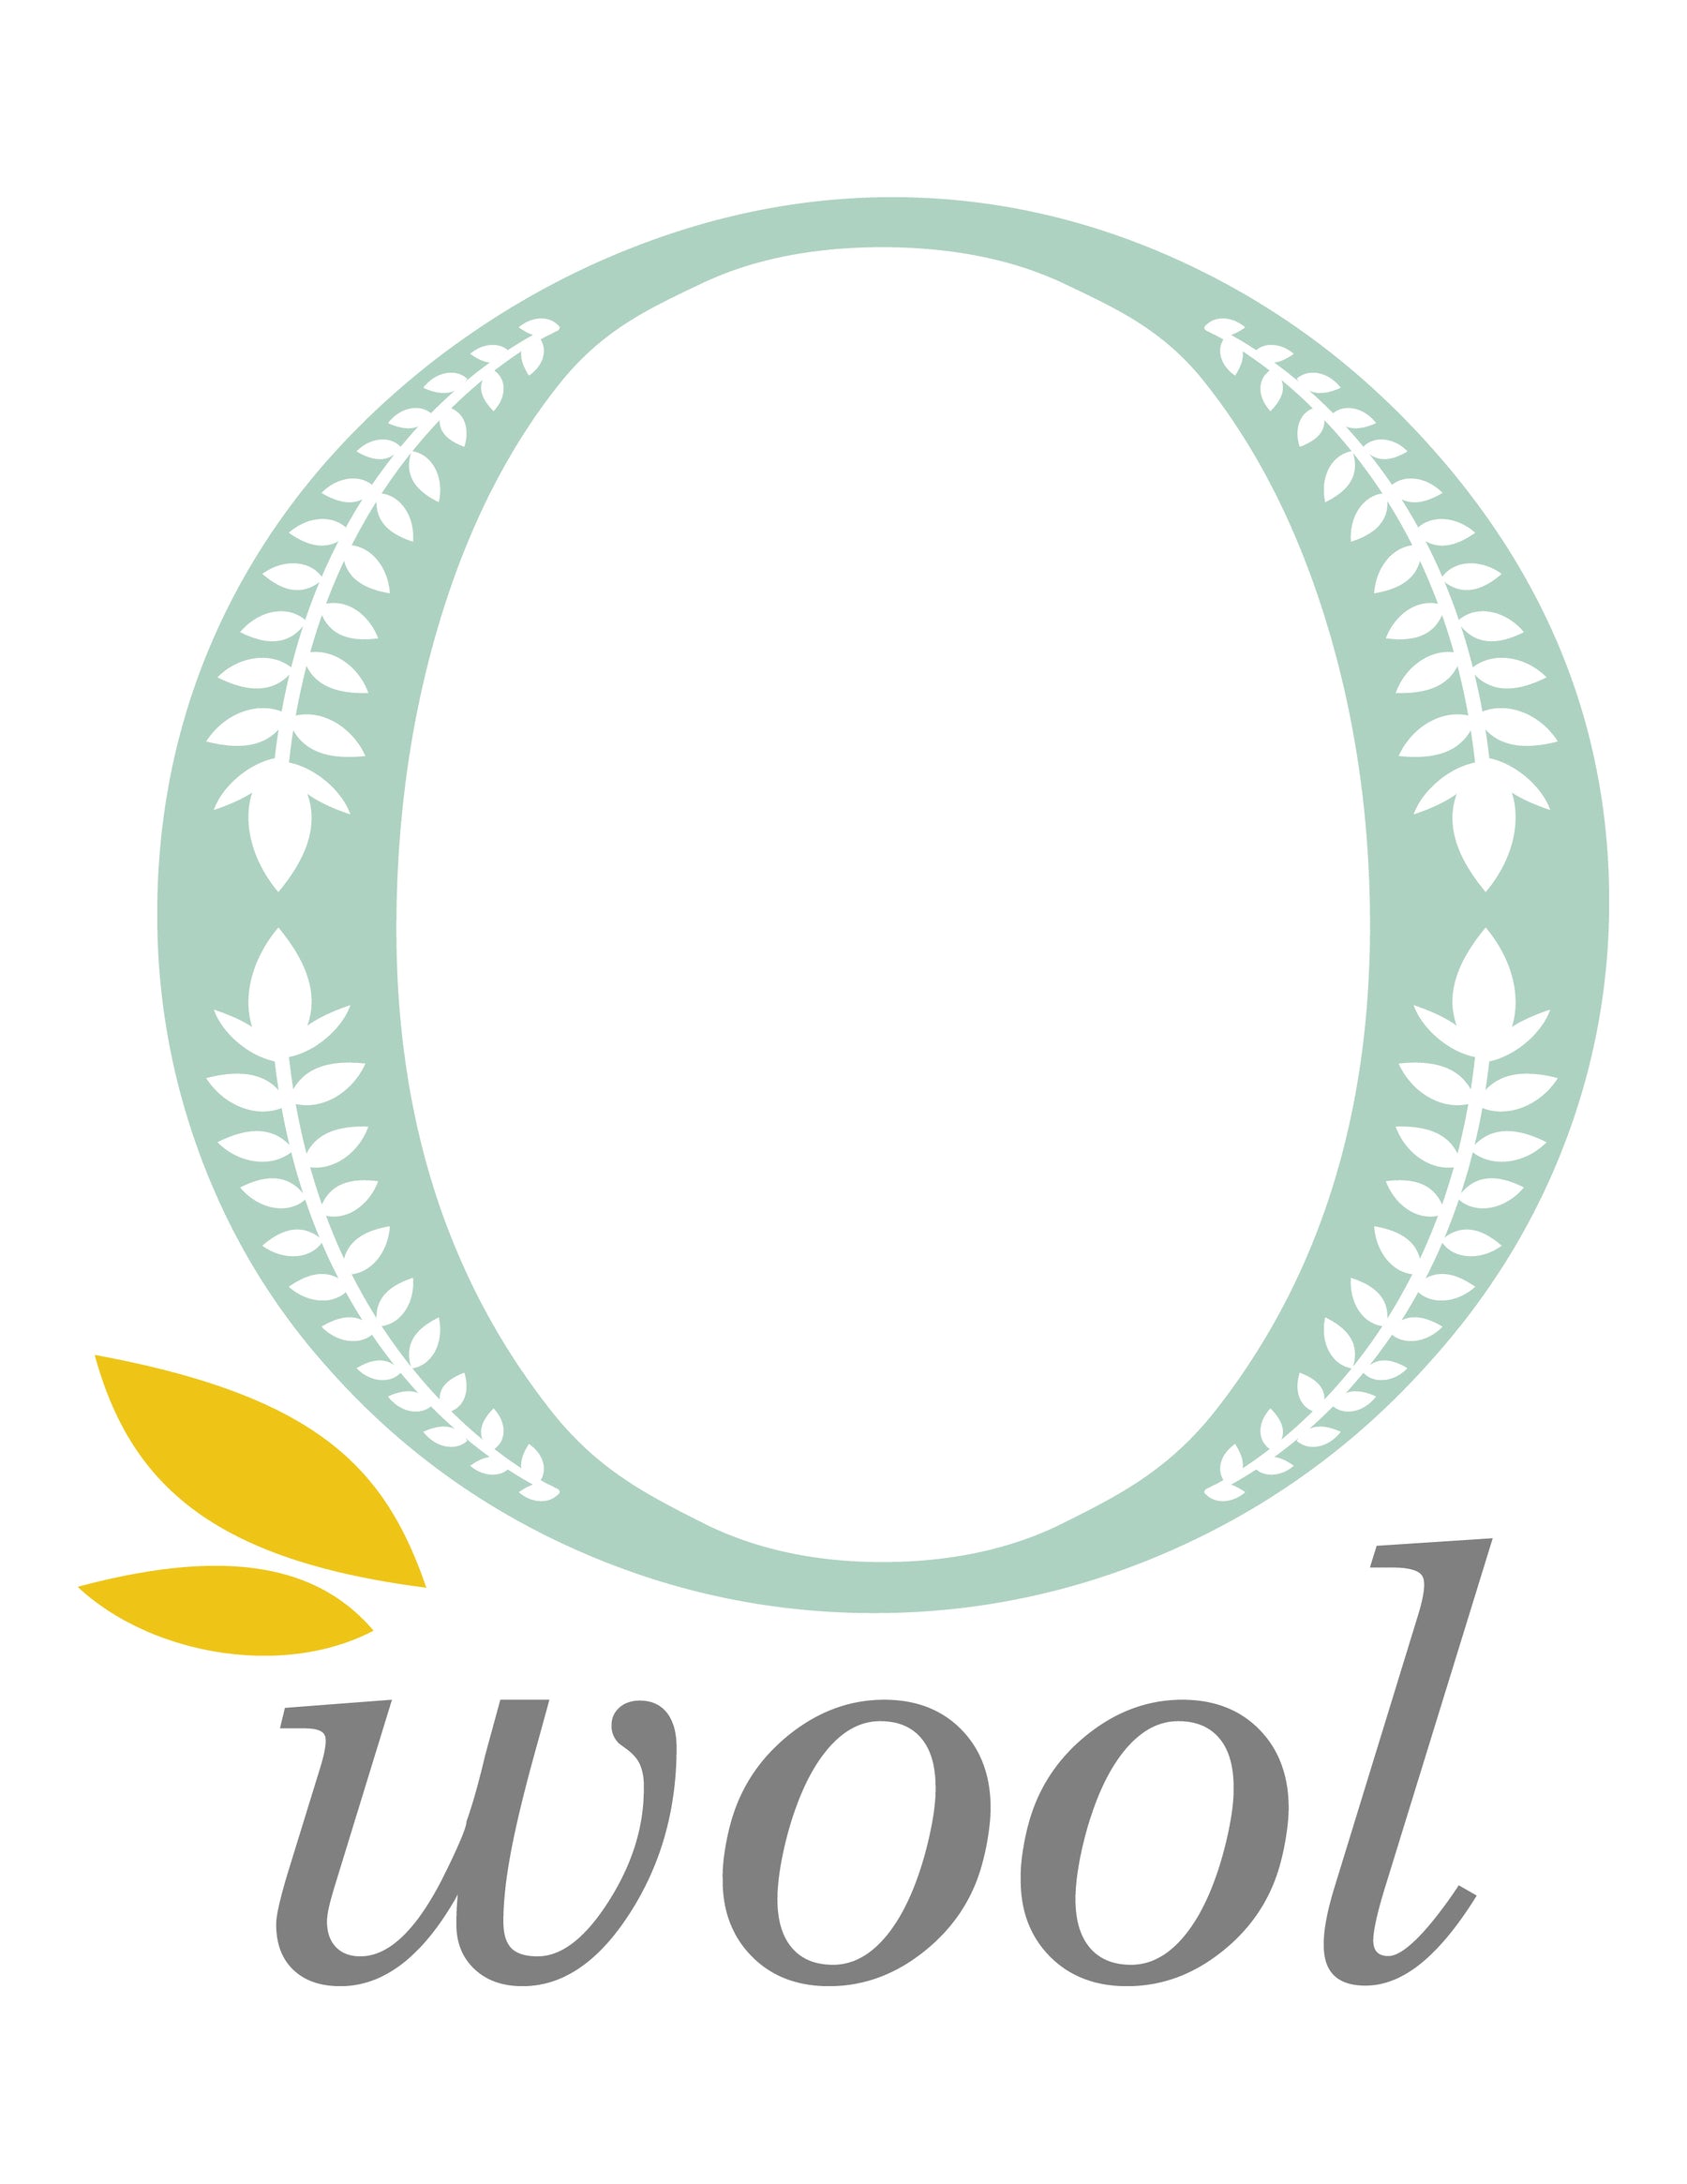 Welcome O-Wool - Our Newest Artisan